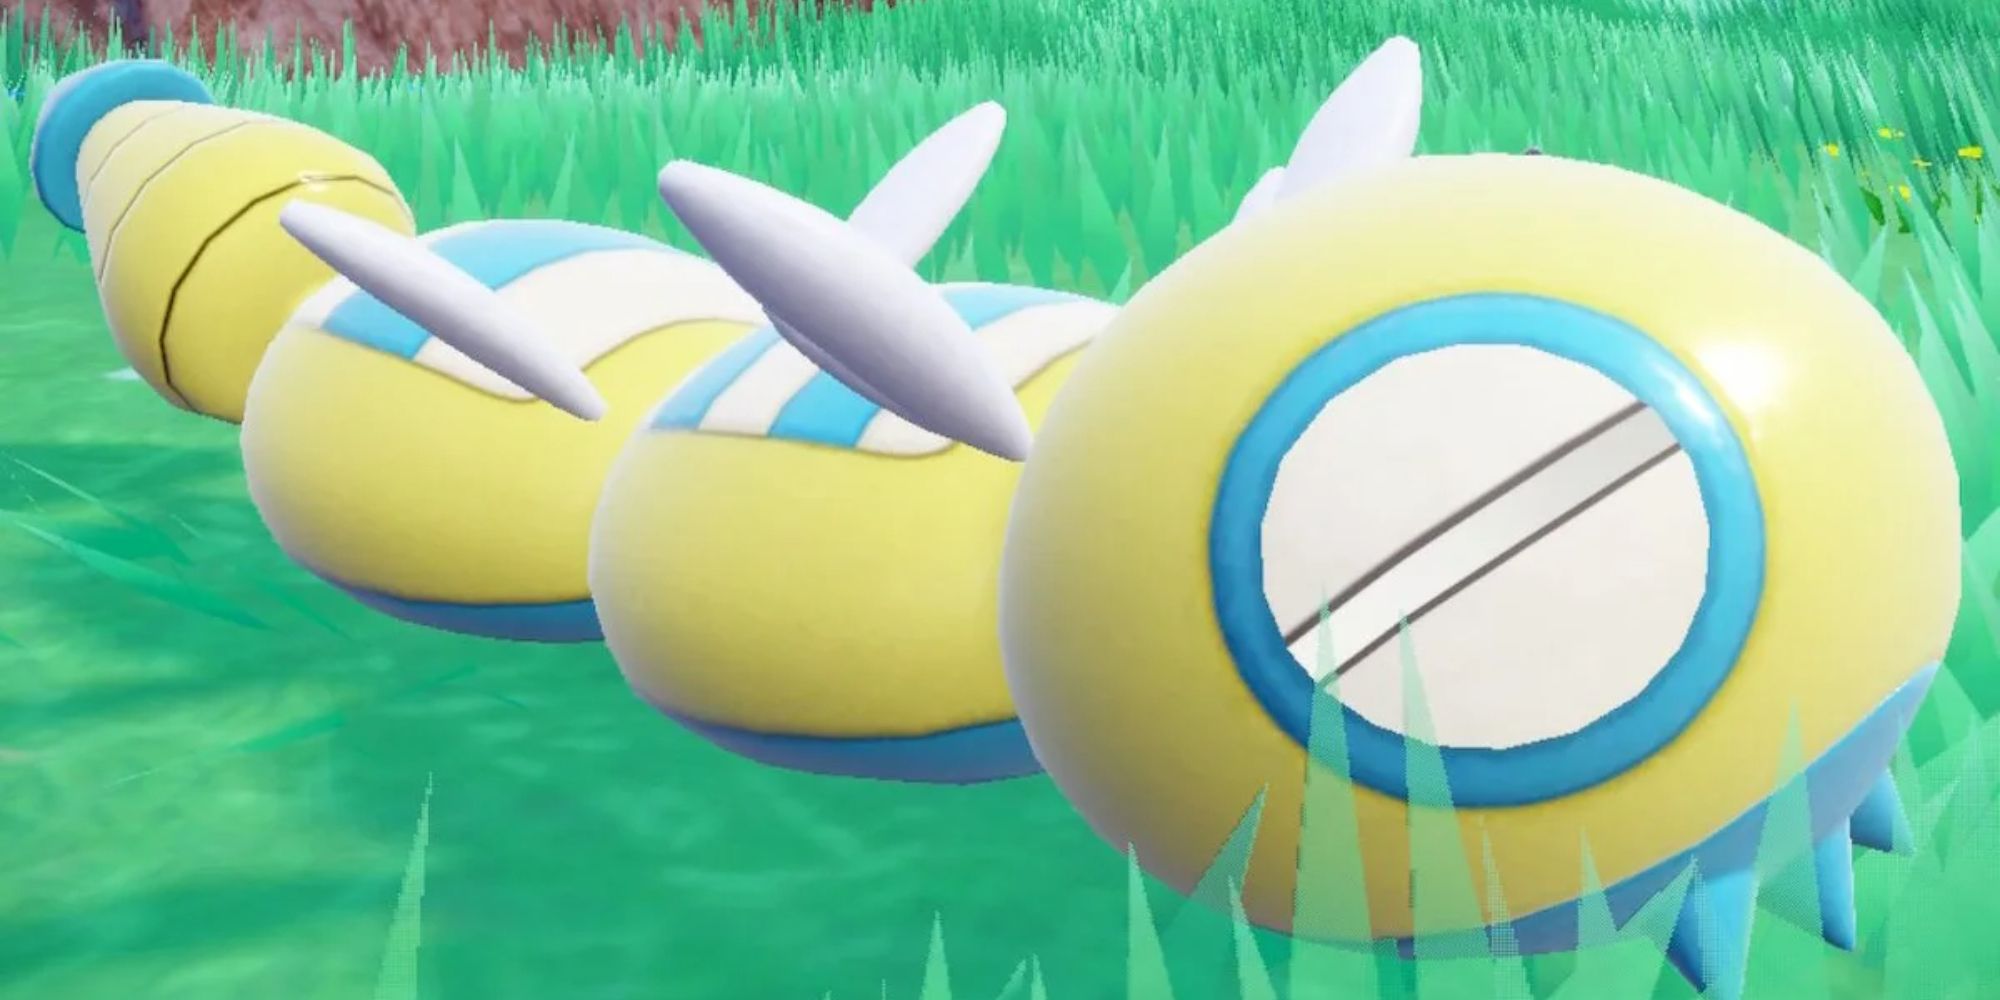 Dudunsparce sitting in grass in Pokemon Scarlet and Violet